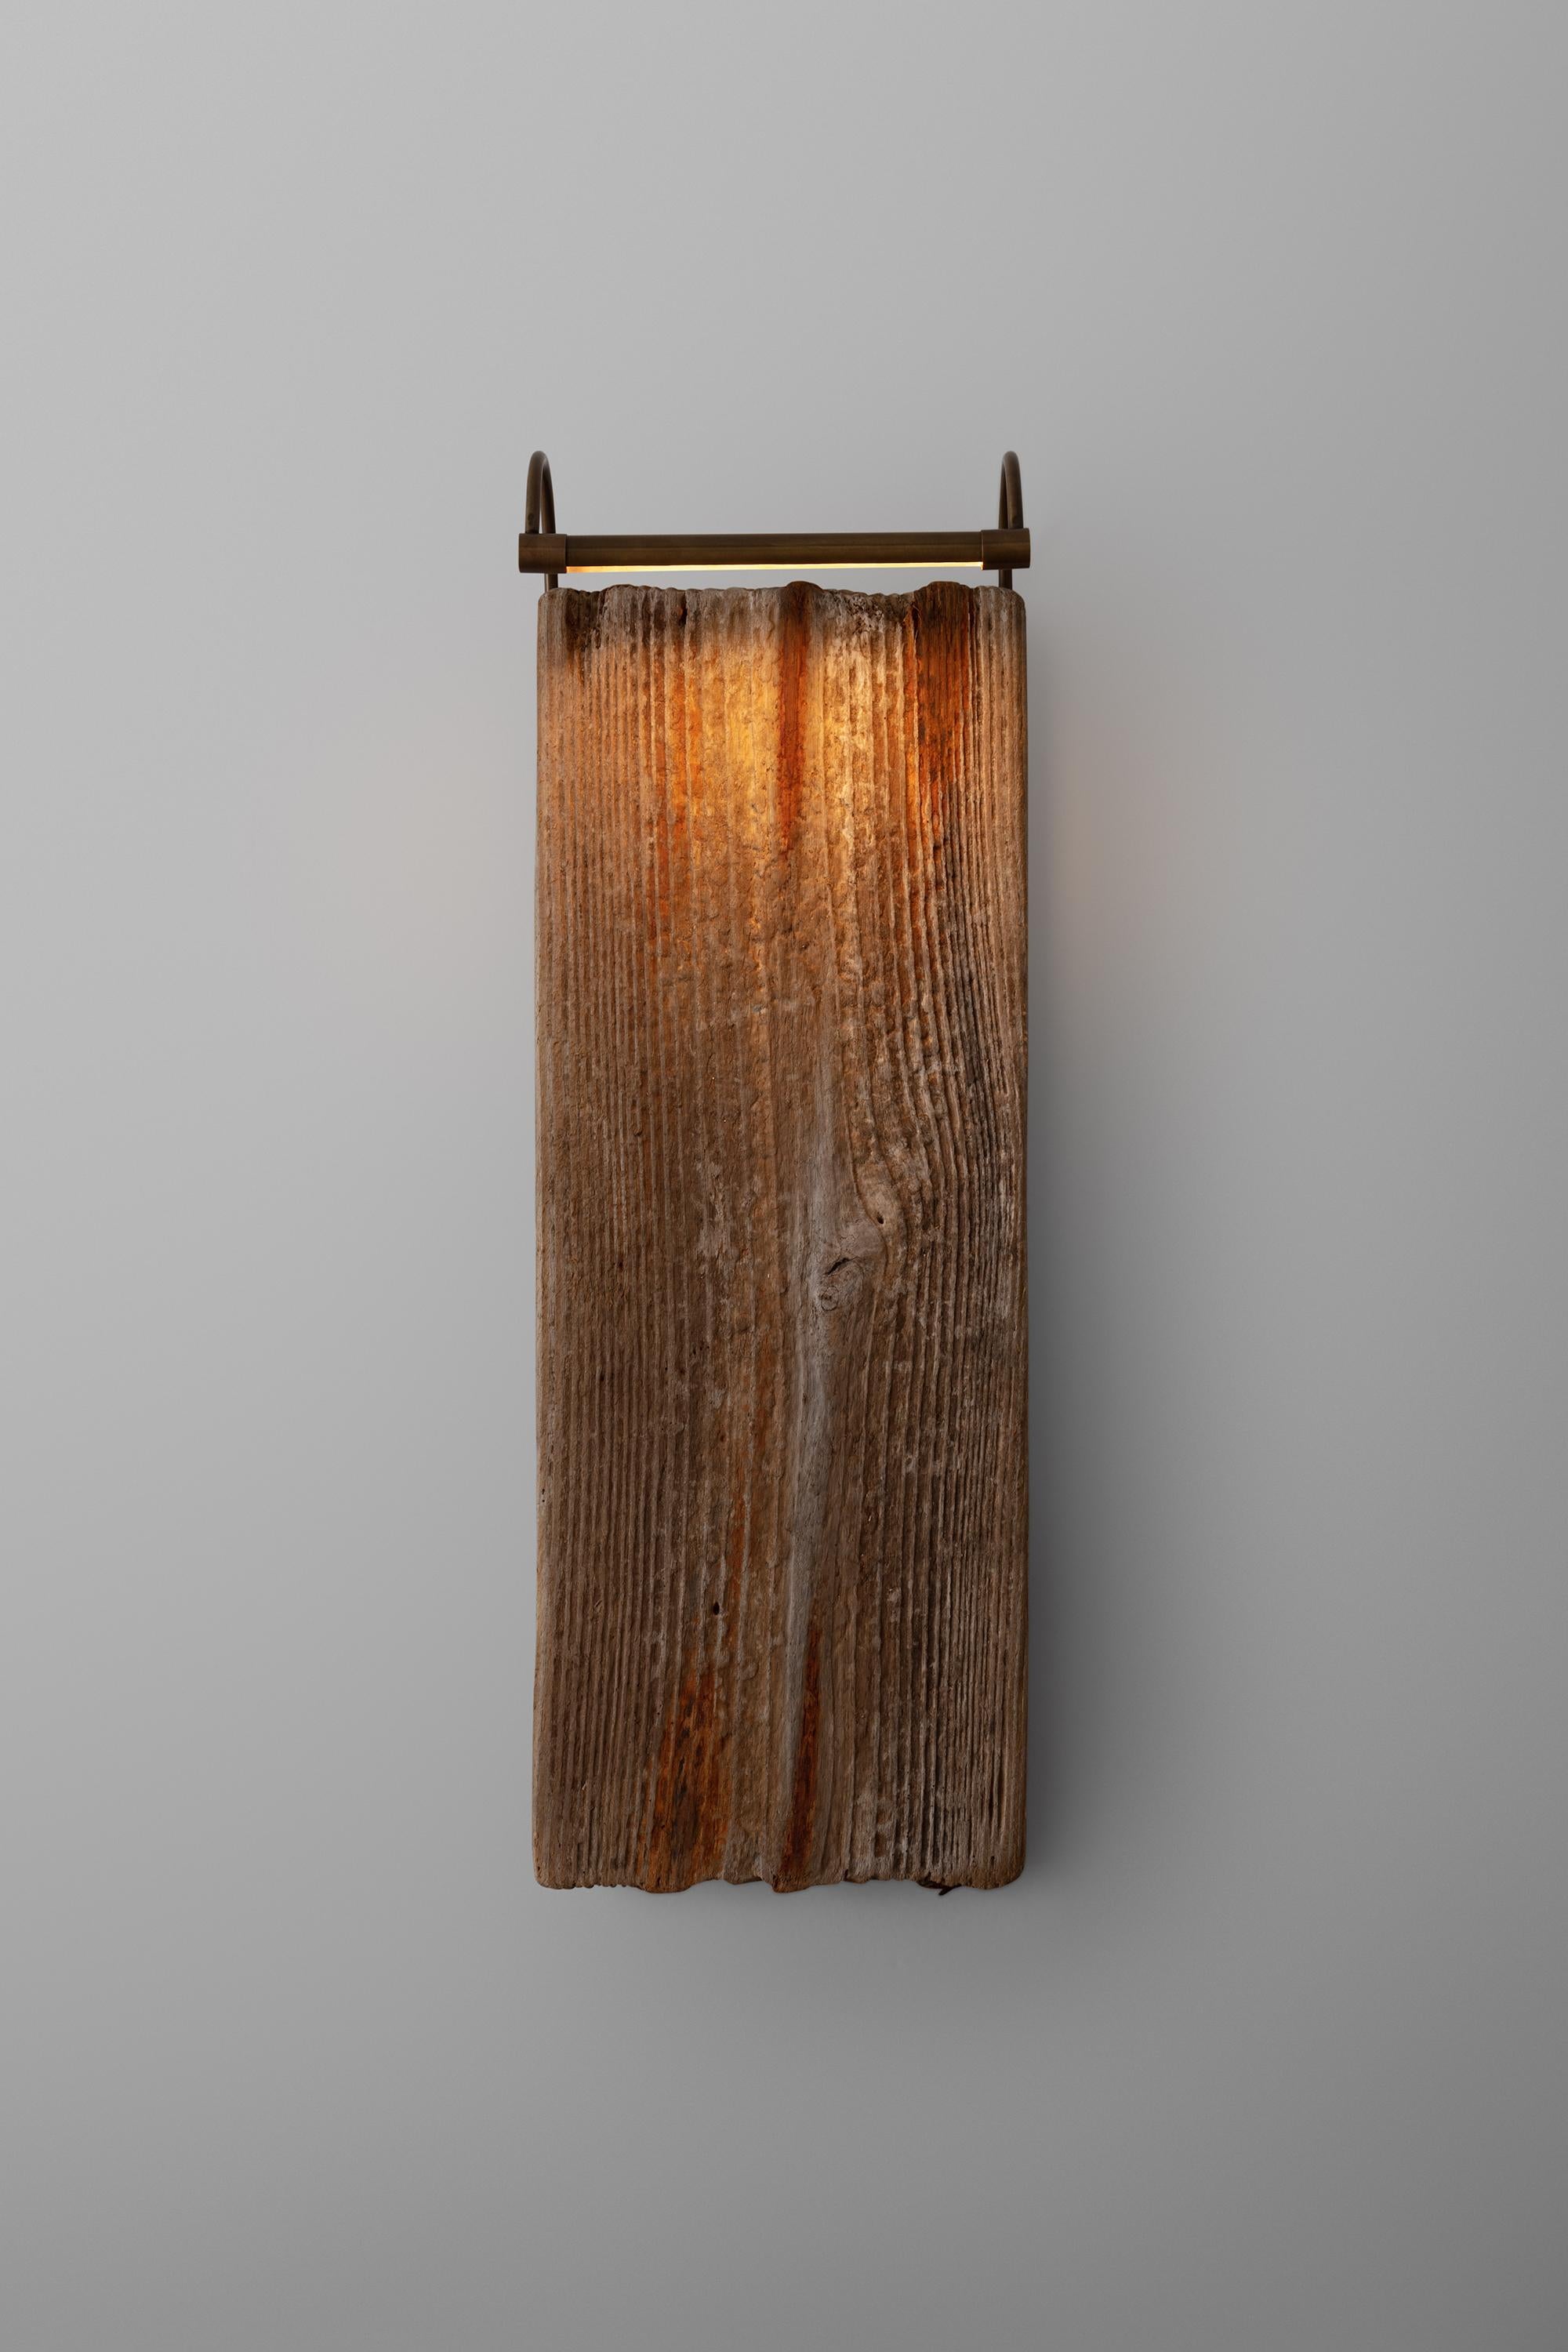 American Waterlogged, Found Wooden Sculpture with LED Sconce in Antique Finish For Sale